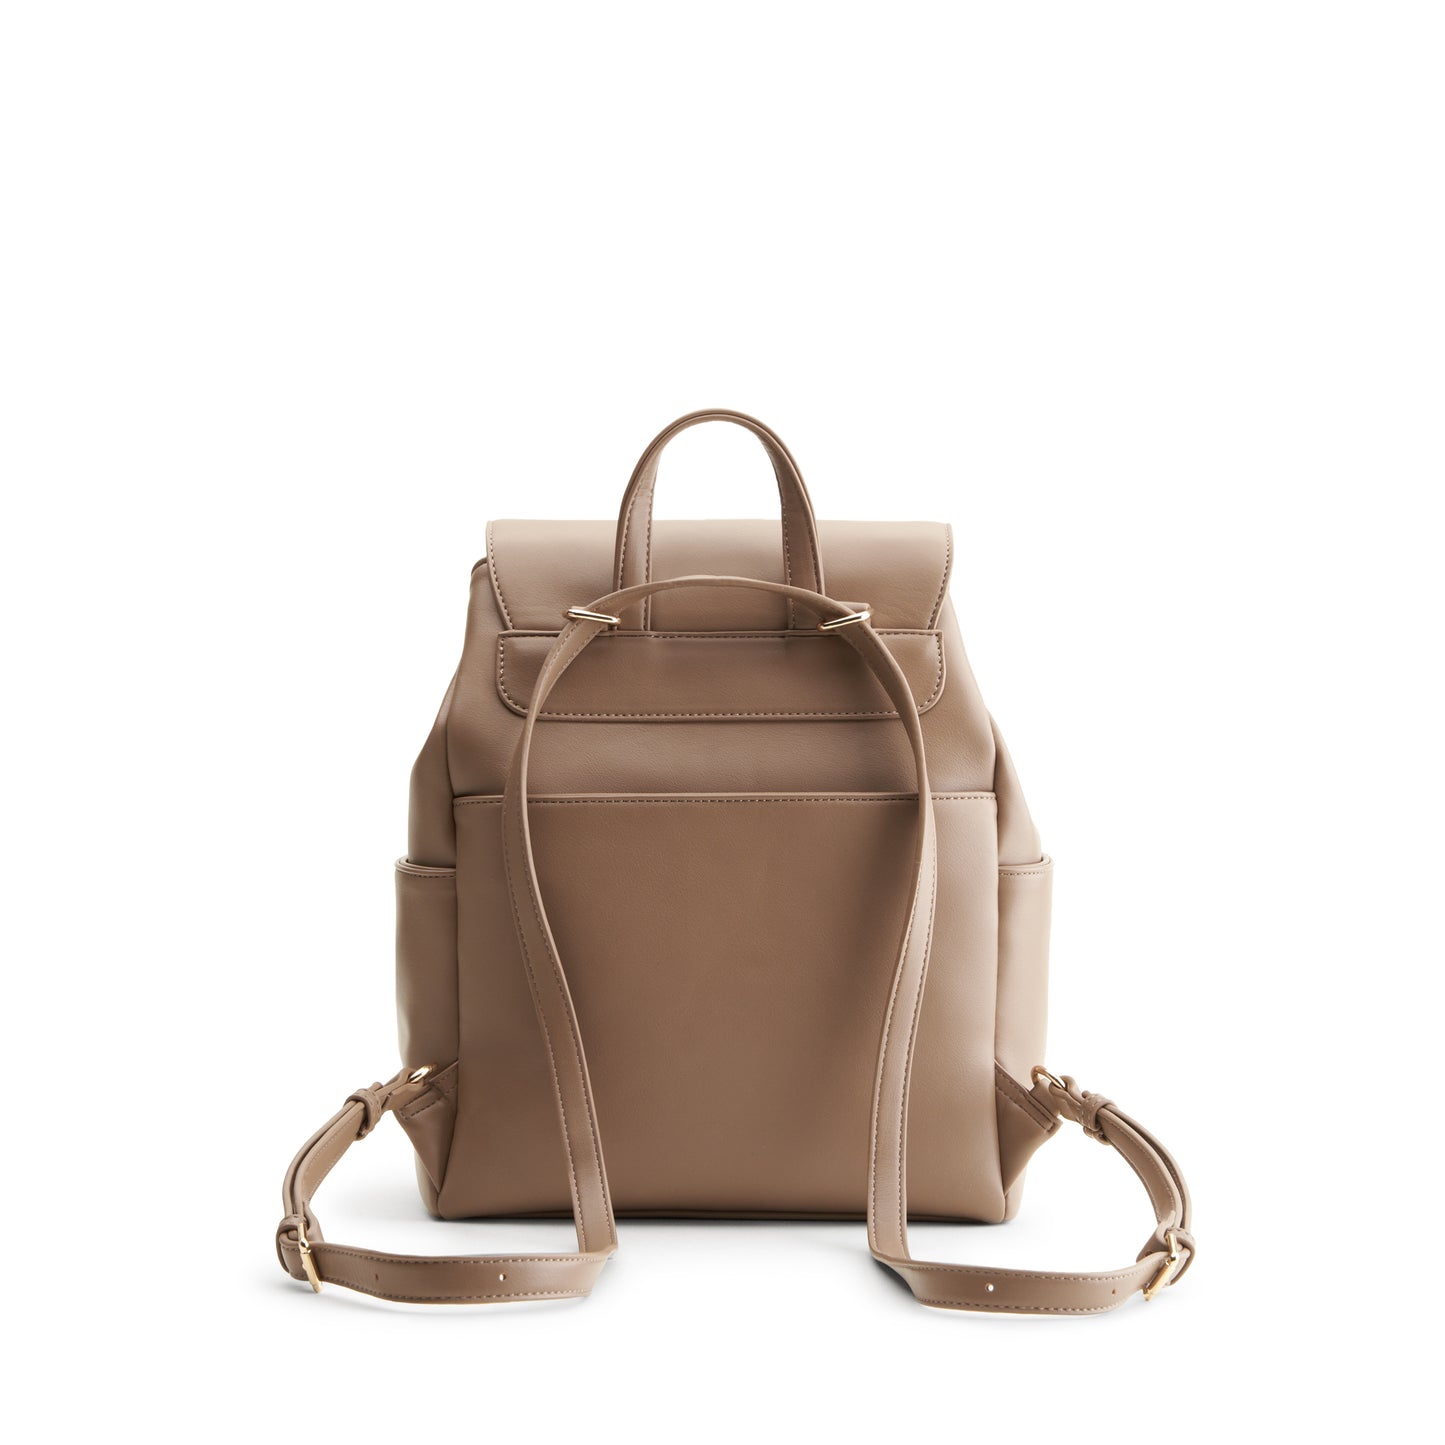 Polly Eco Flap Backpack